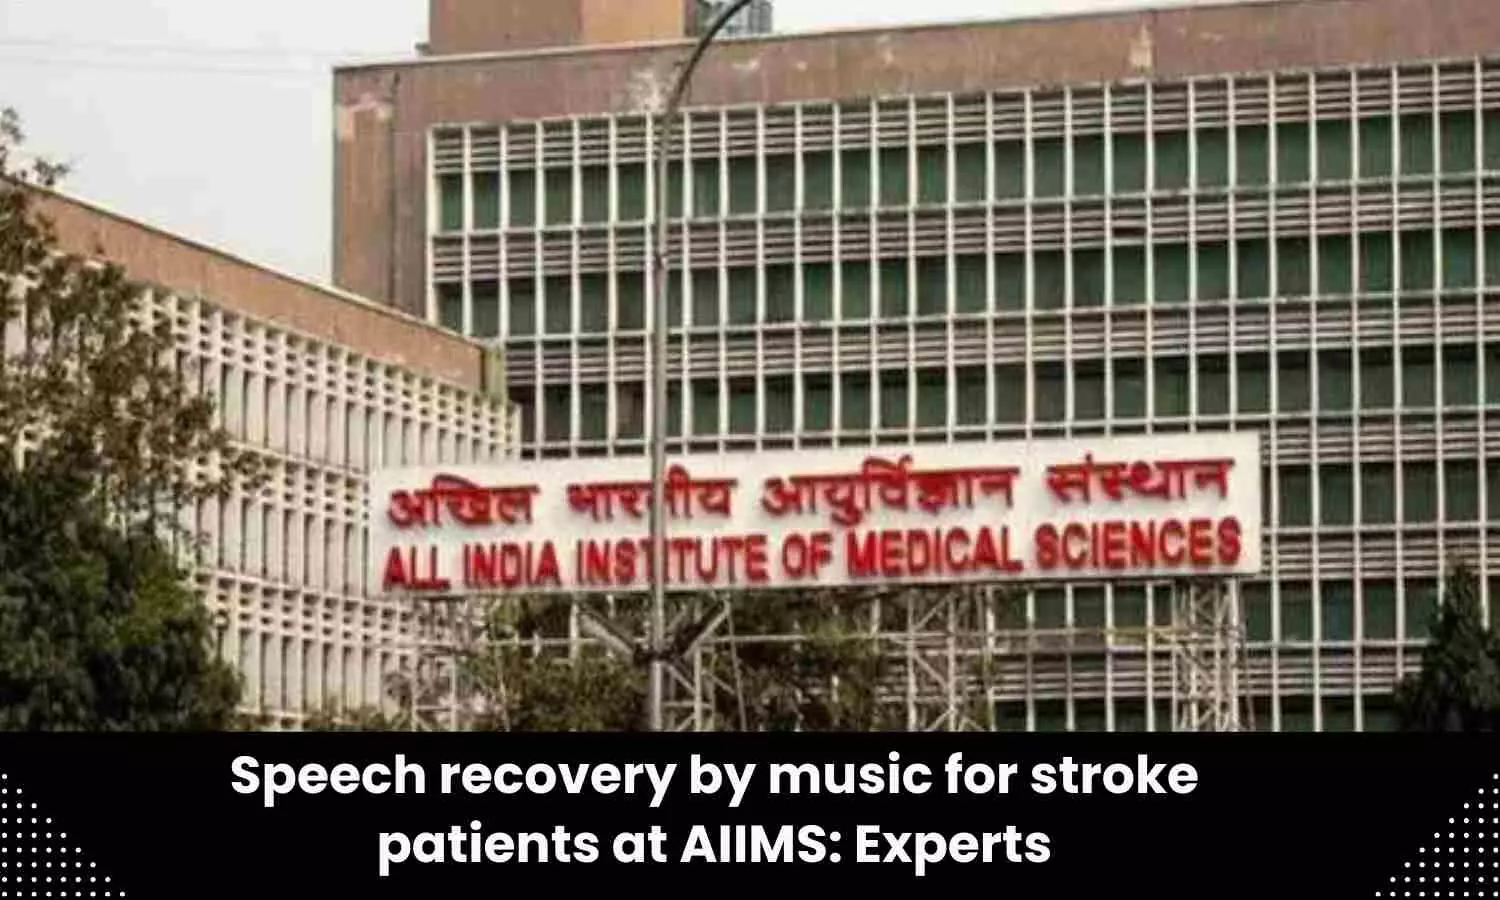 AIIMS Delhi uses music therapy in stroke patients for speech rehabilitation